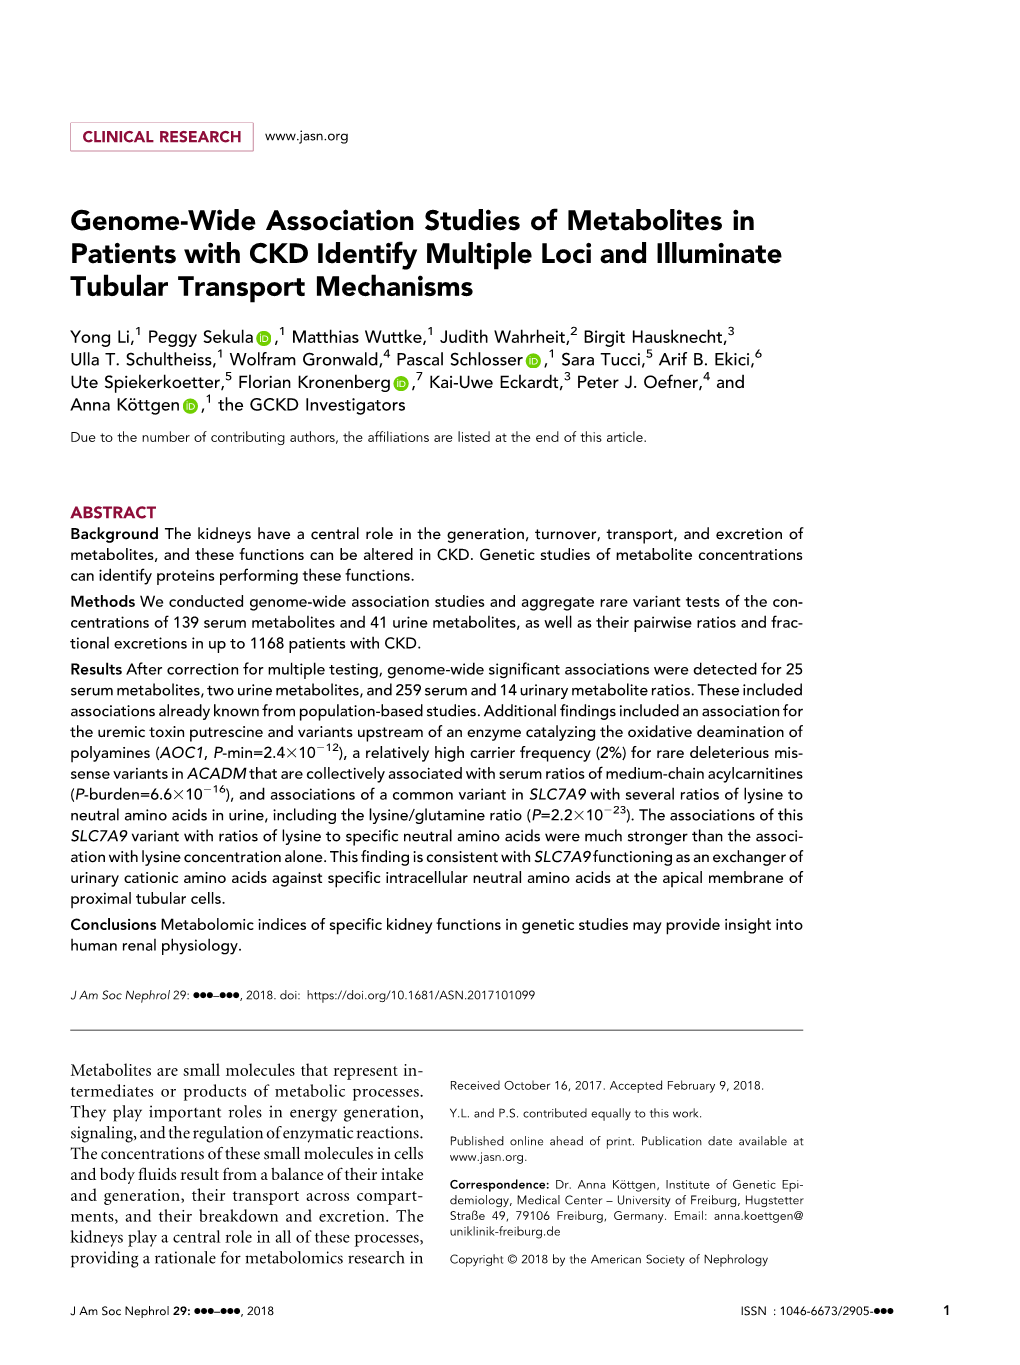 Genome-Wide Association Studies of Metabolites in Patients with CKD Identify Multiple Loci and Illuminate Tubular Transport Mechanisms